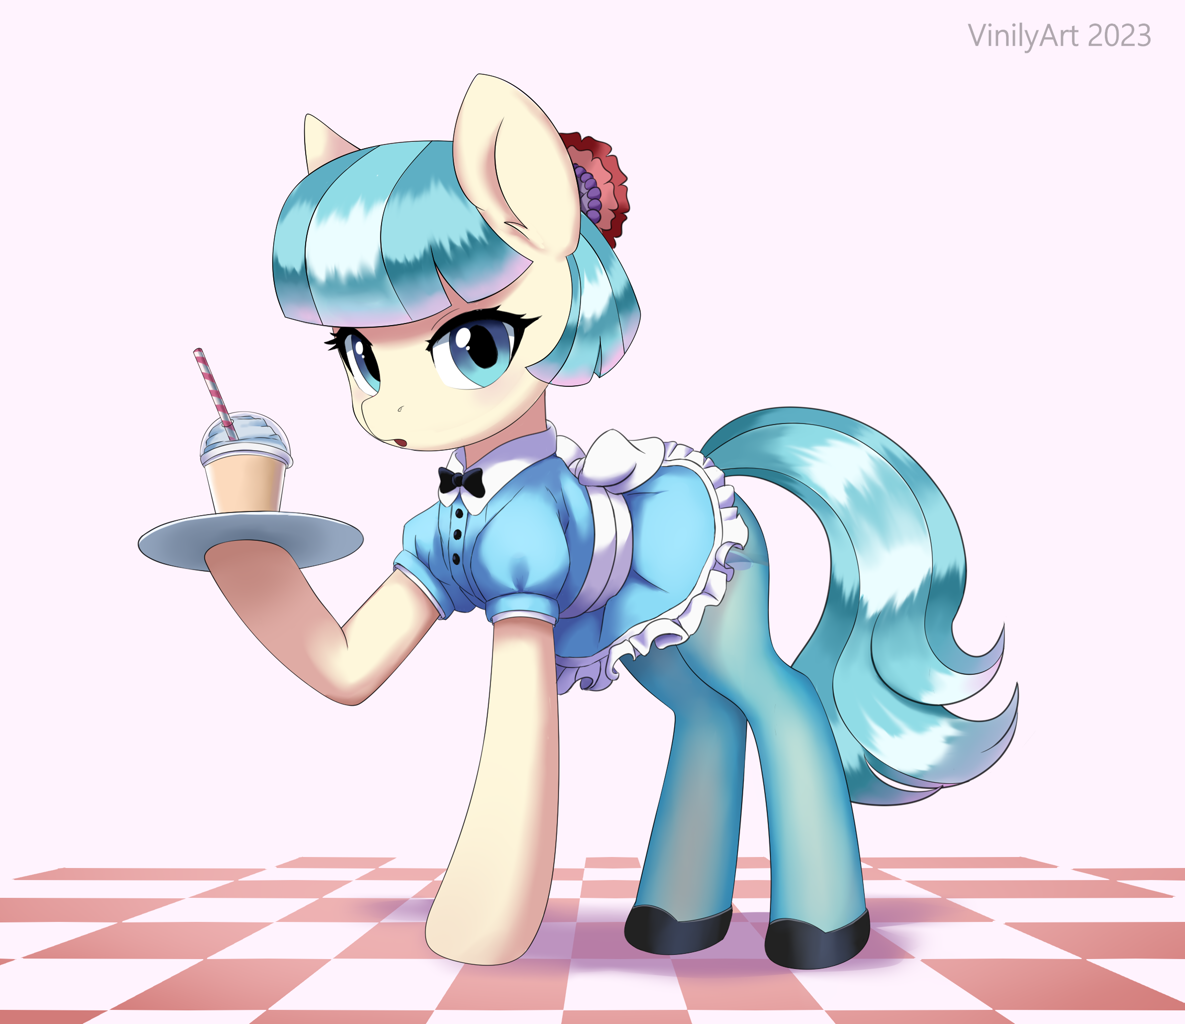 [bowtie,clothes,cute,earth pony,female,mare,pantyhose,pony,safe,solo,waitress,cocobetes,coco pommel,artist:vinilyart]